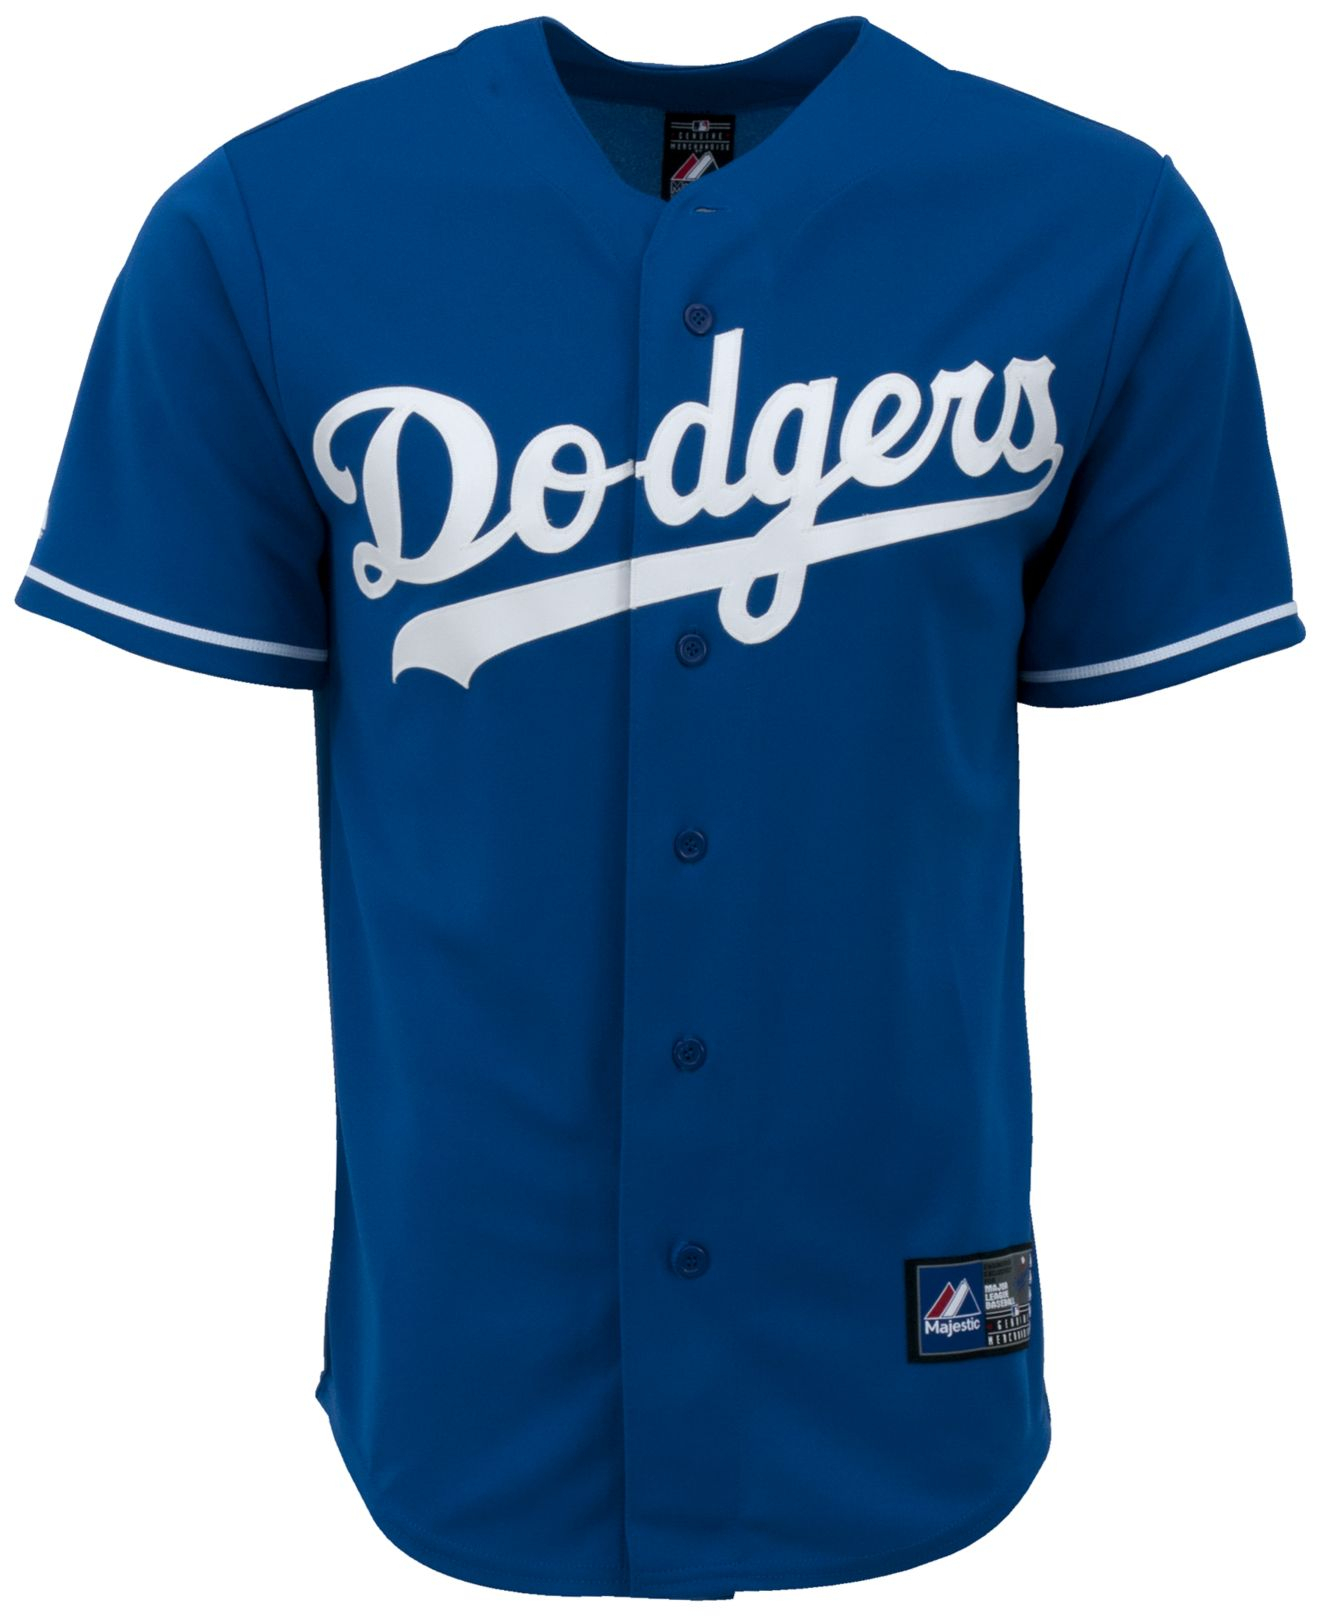 Dodgers Jersey - Bing images